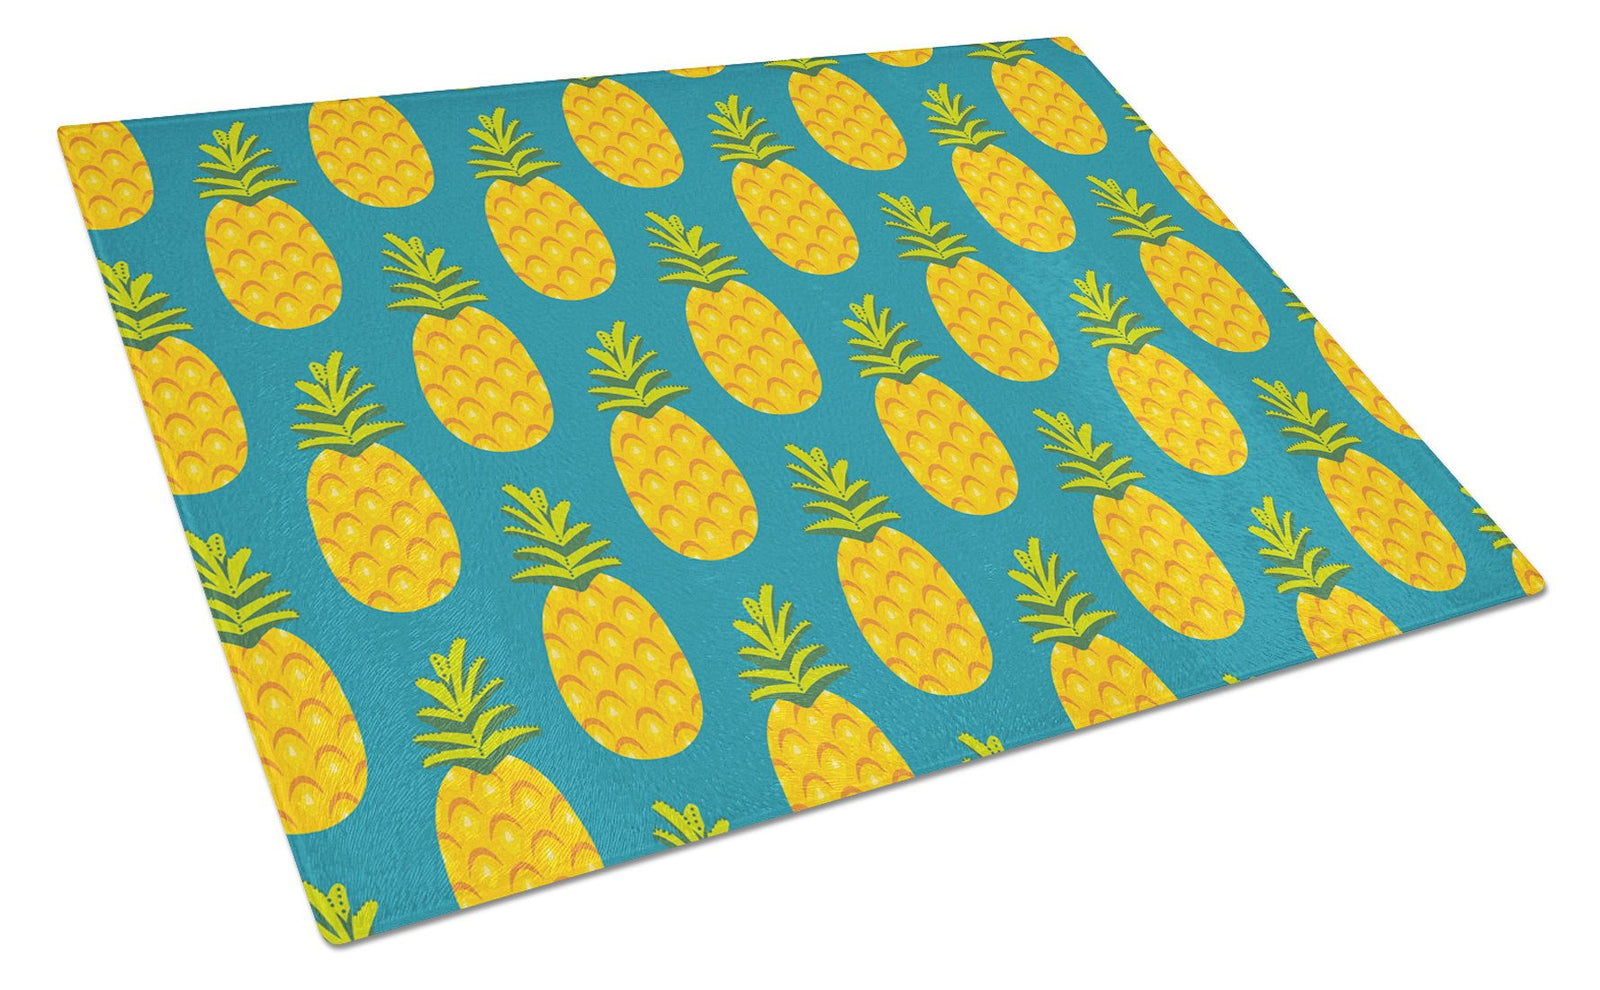 Pineapples on Teal Glass Cutting Board Large BB5145LCB by Caroline's Treasures